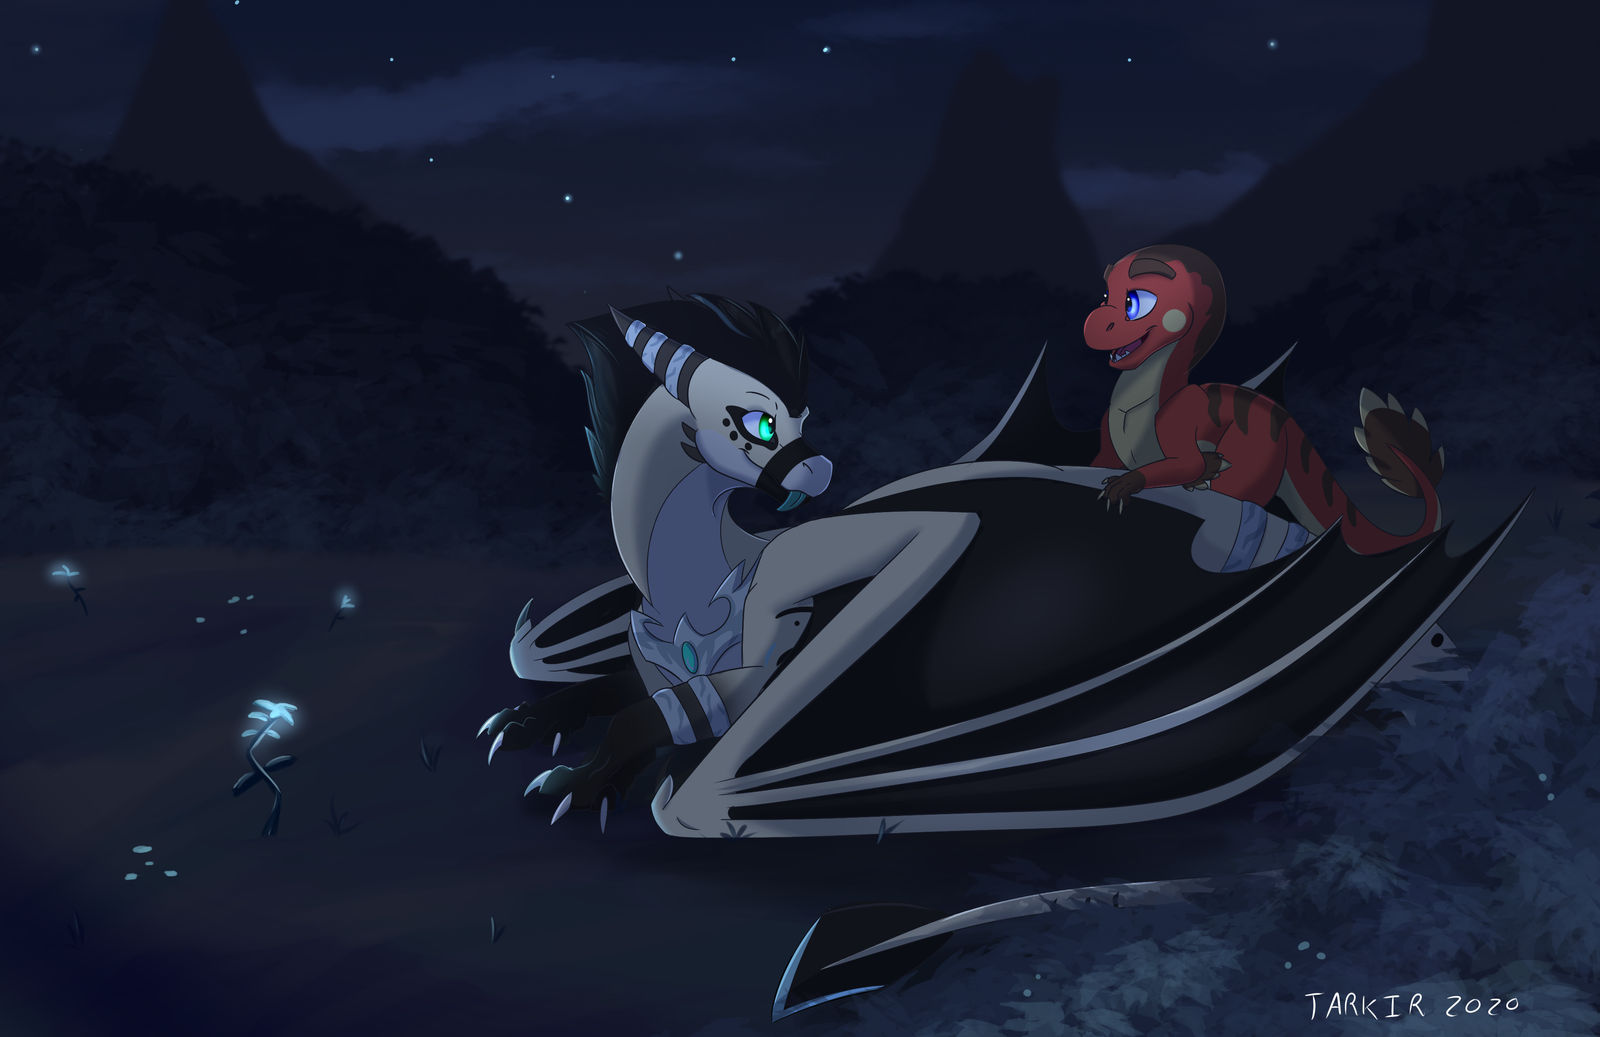 where_did_you_come_from__by_tarkir_de9h6a4-fullview.png